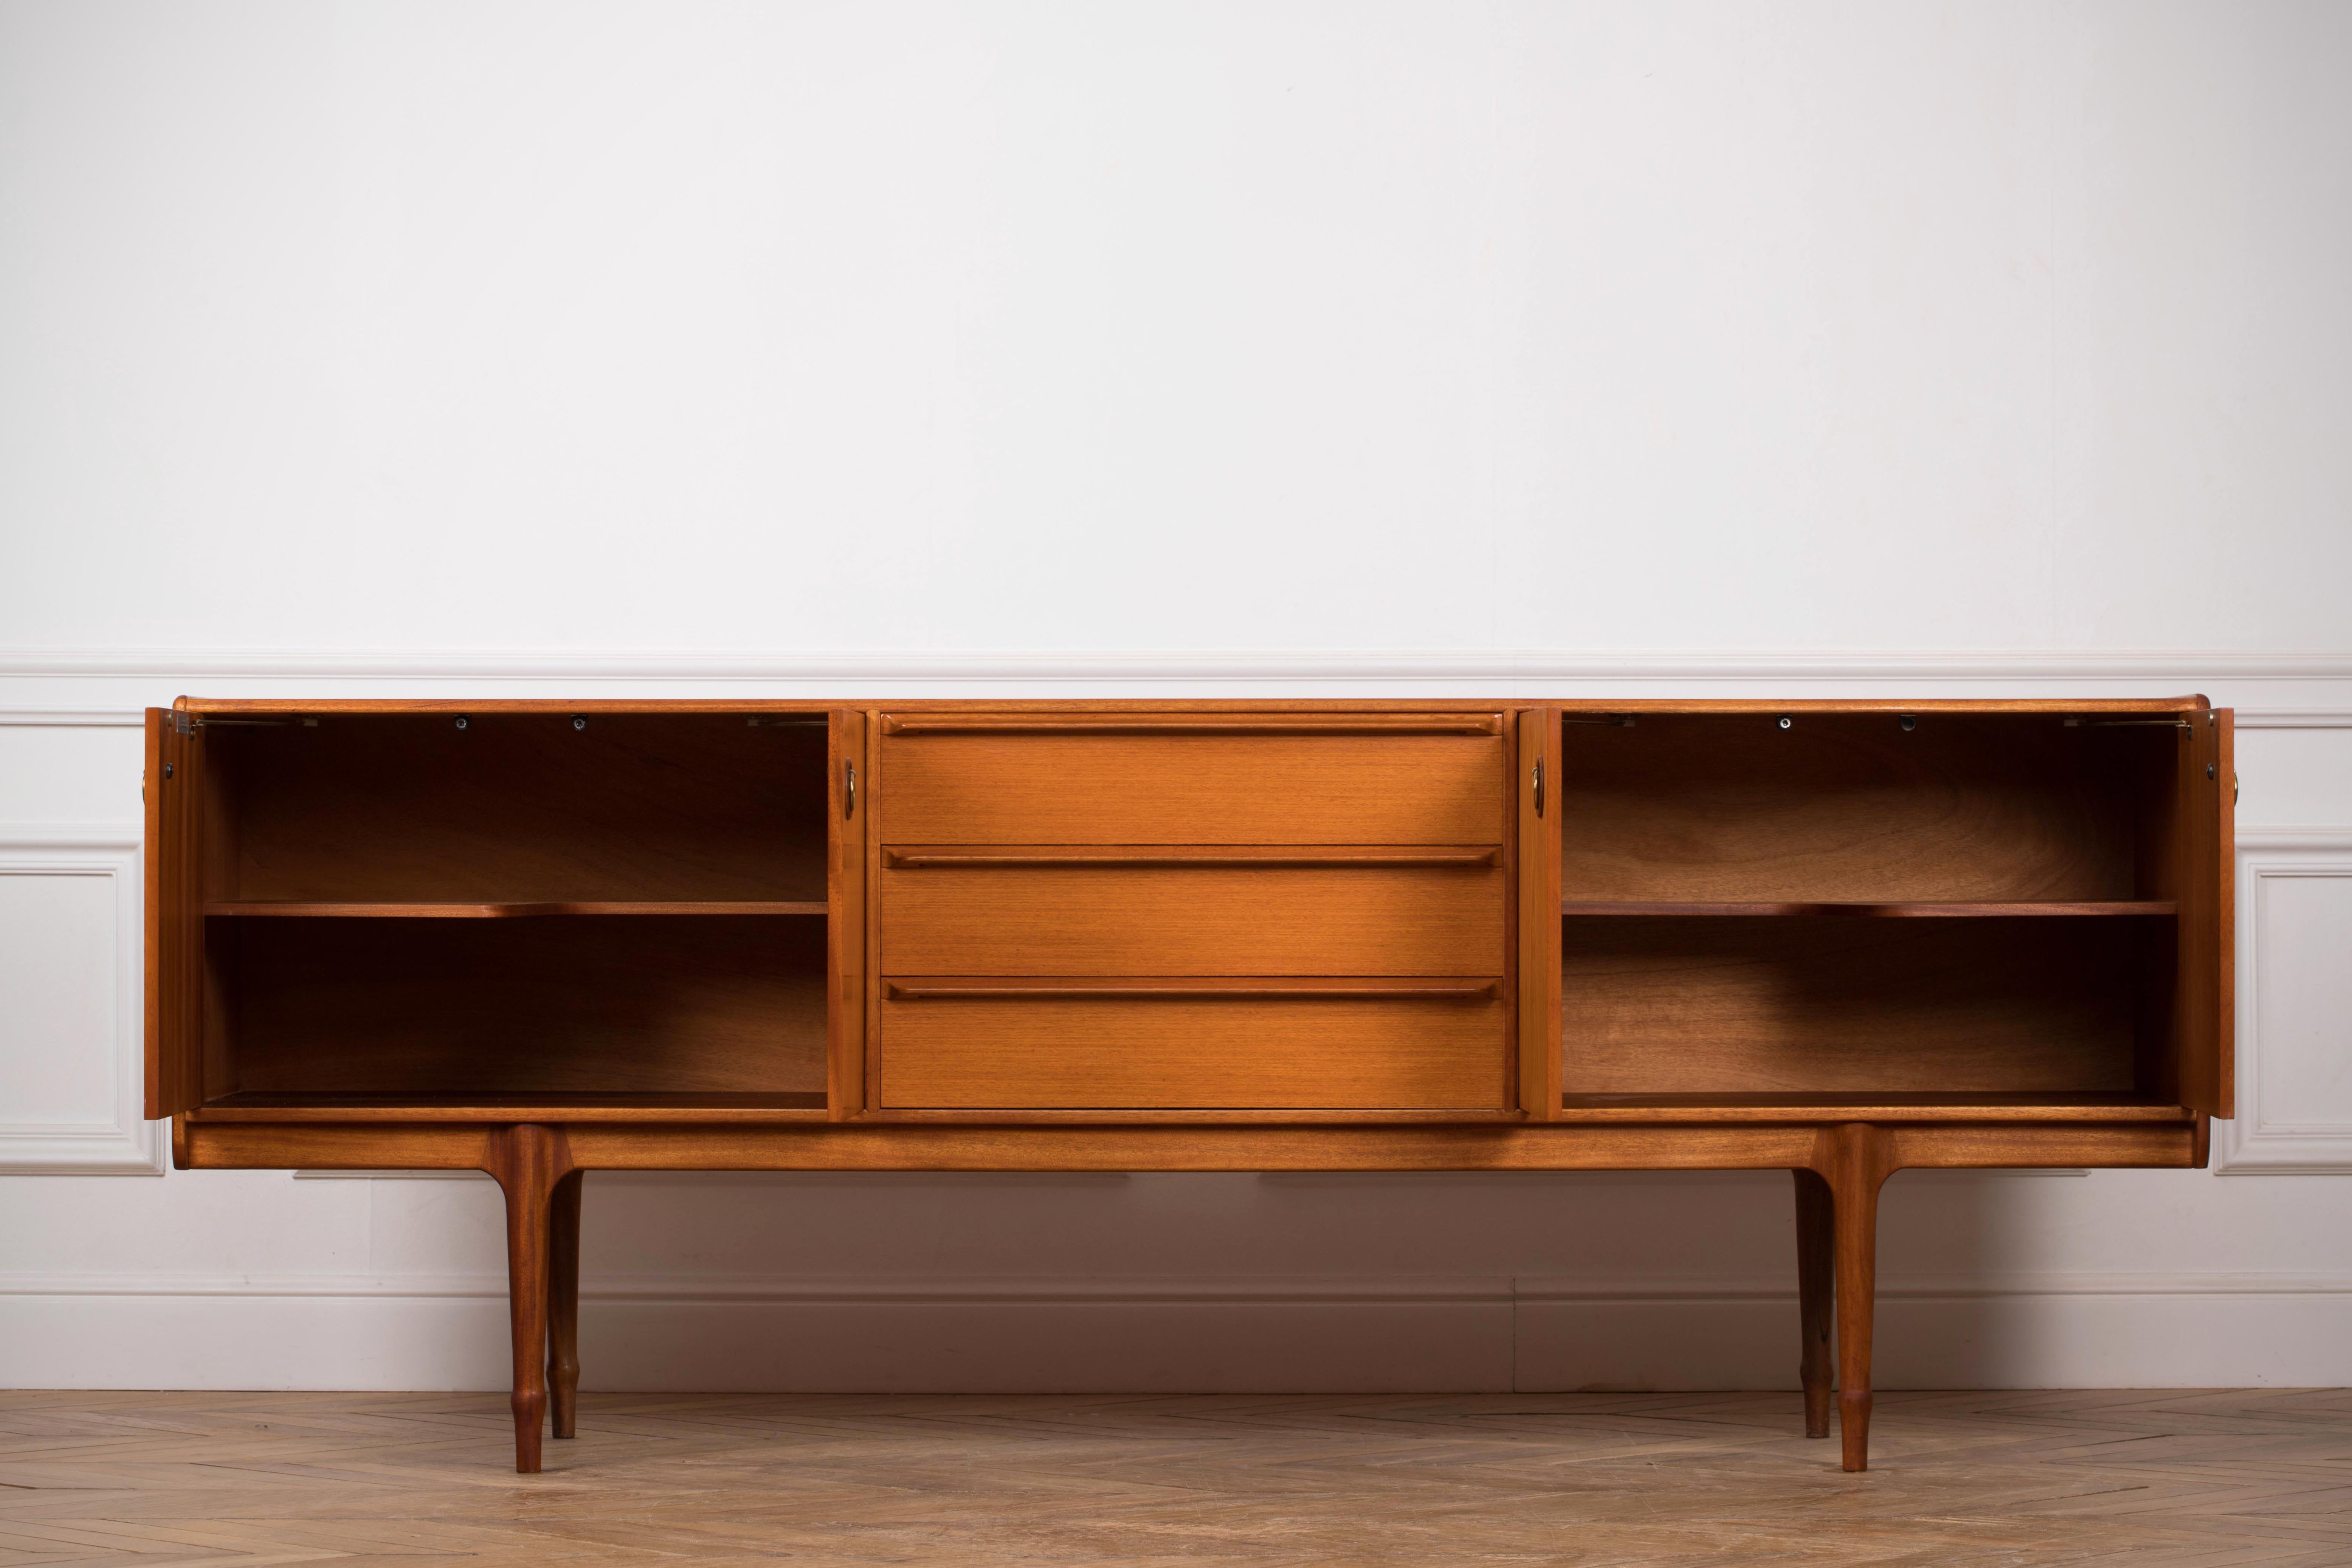 20th Century Mid-Century Modern Teak Sideboard Credenza by Tom Robertson for A.H. McIntosh